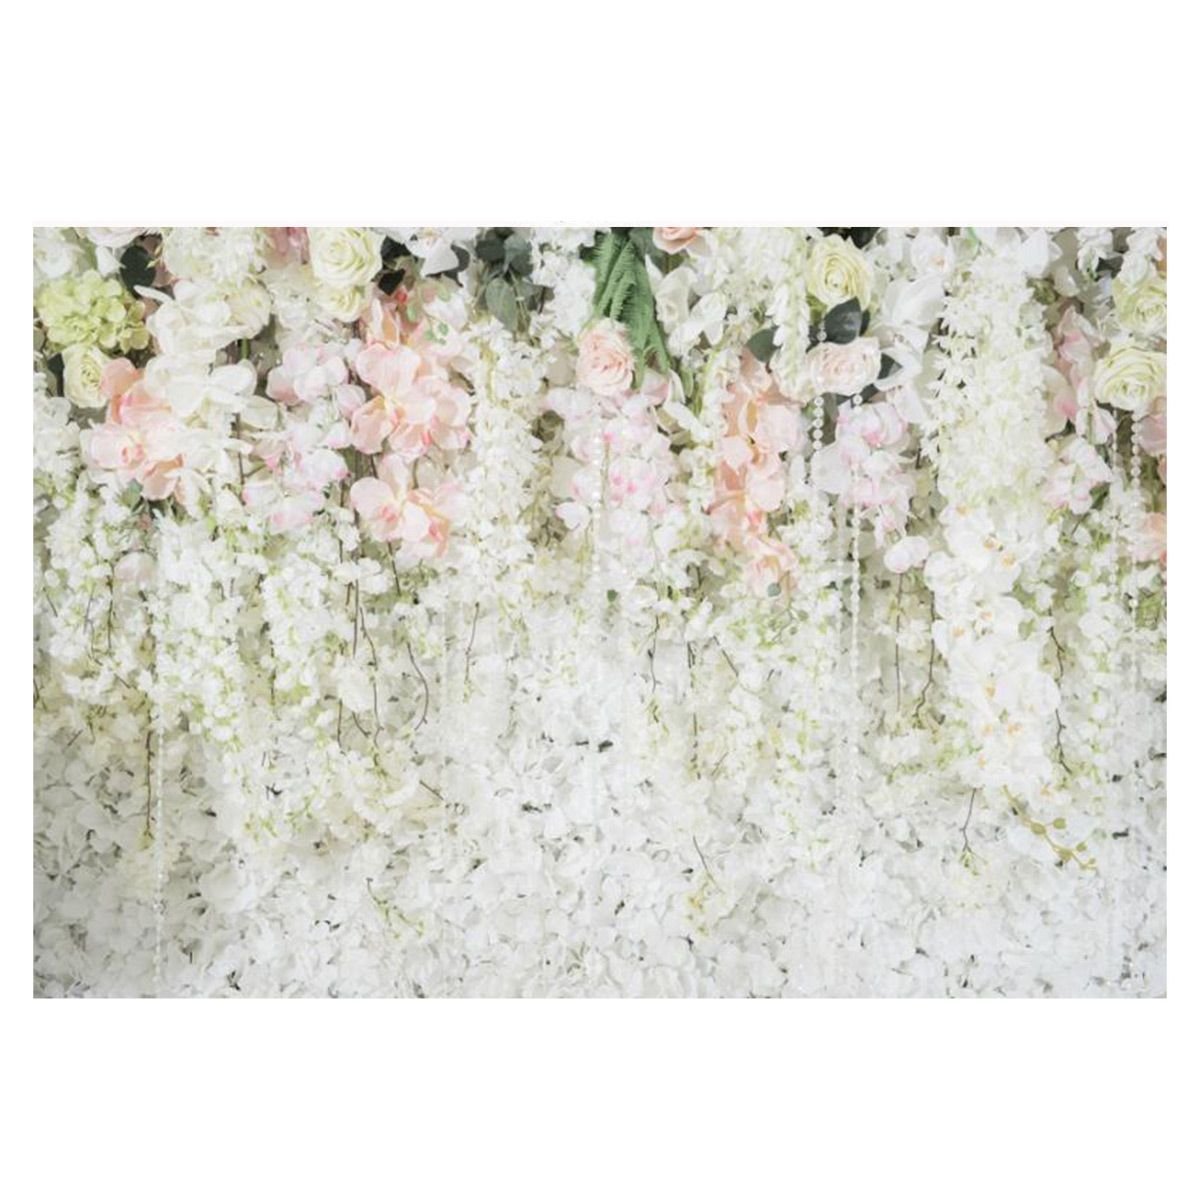 09x15m-15x21m-18x27m-White-Flowers-Sea-Photography-Studio-Wall-Backdrop-Photo-Background-Cloth-for-B-1718838